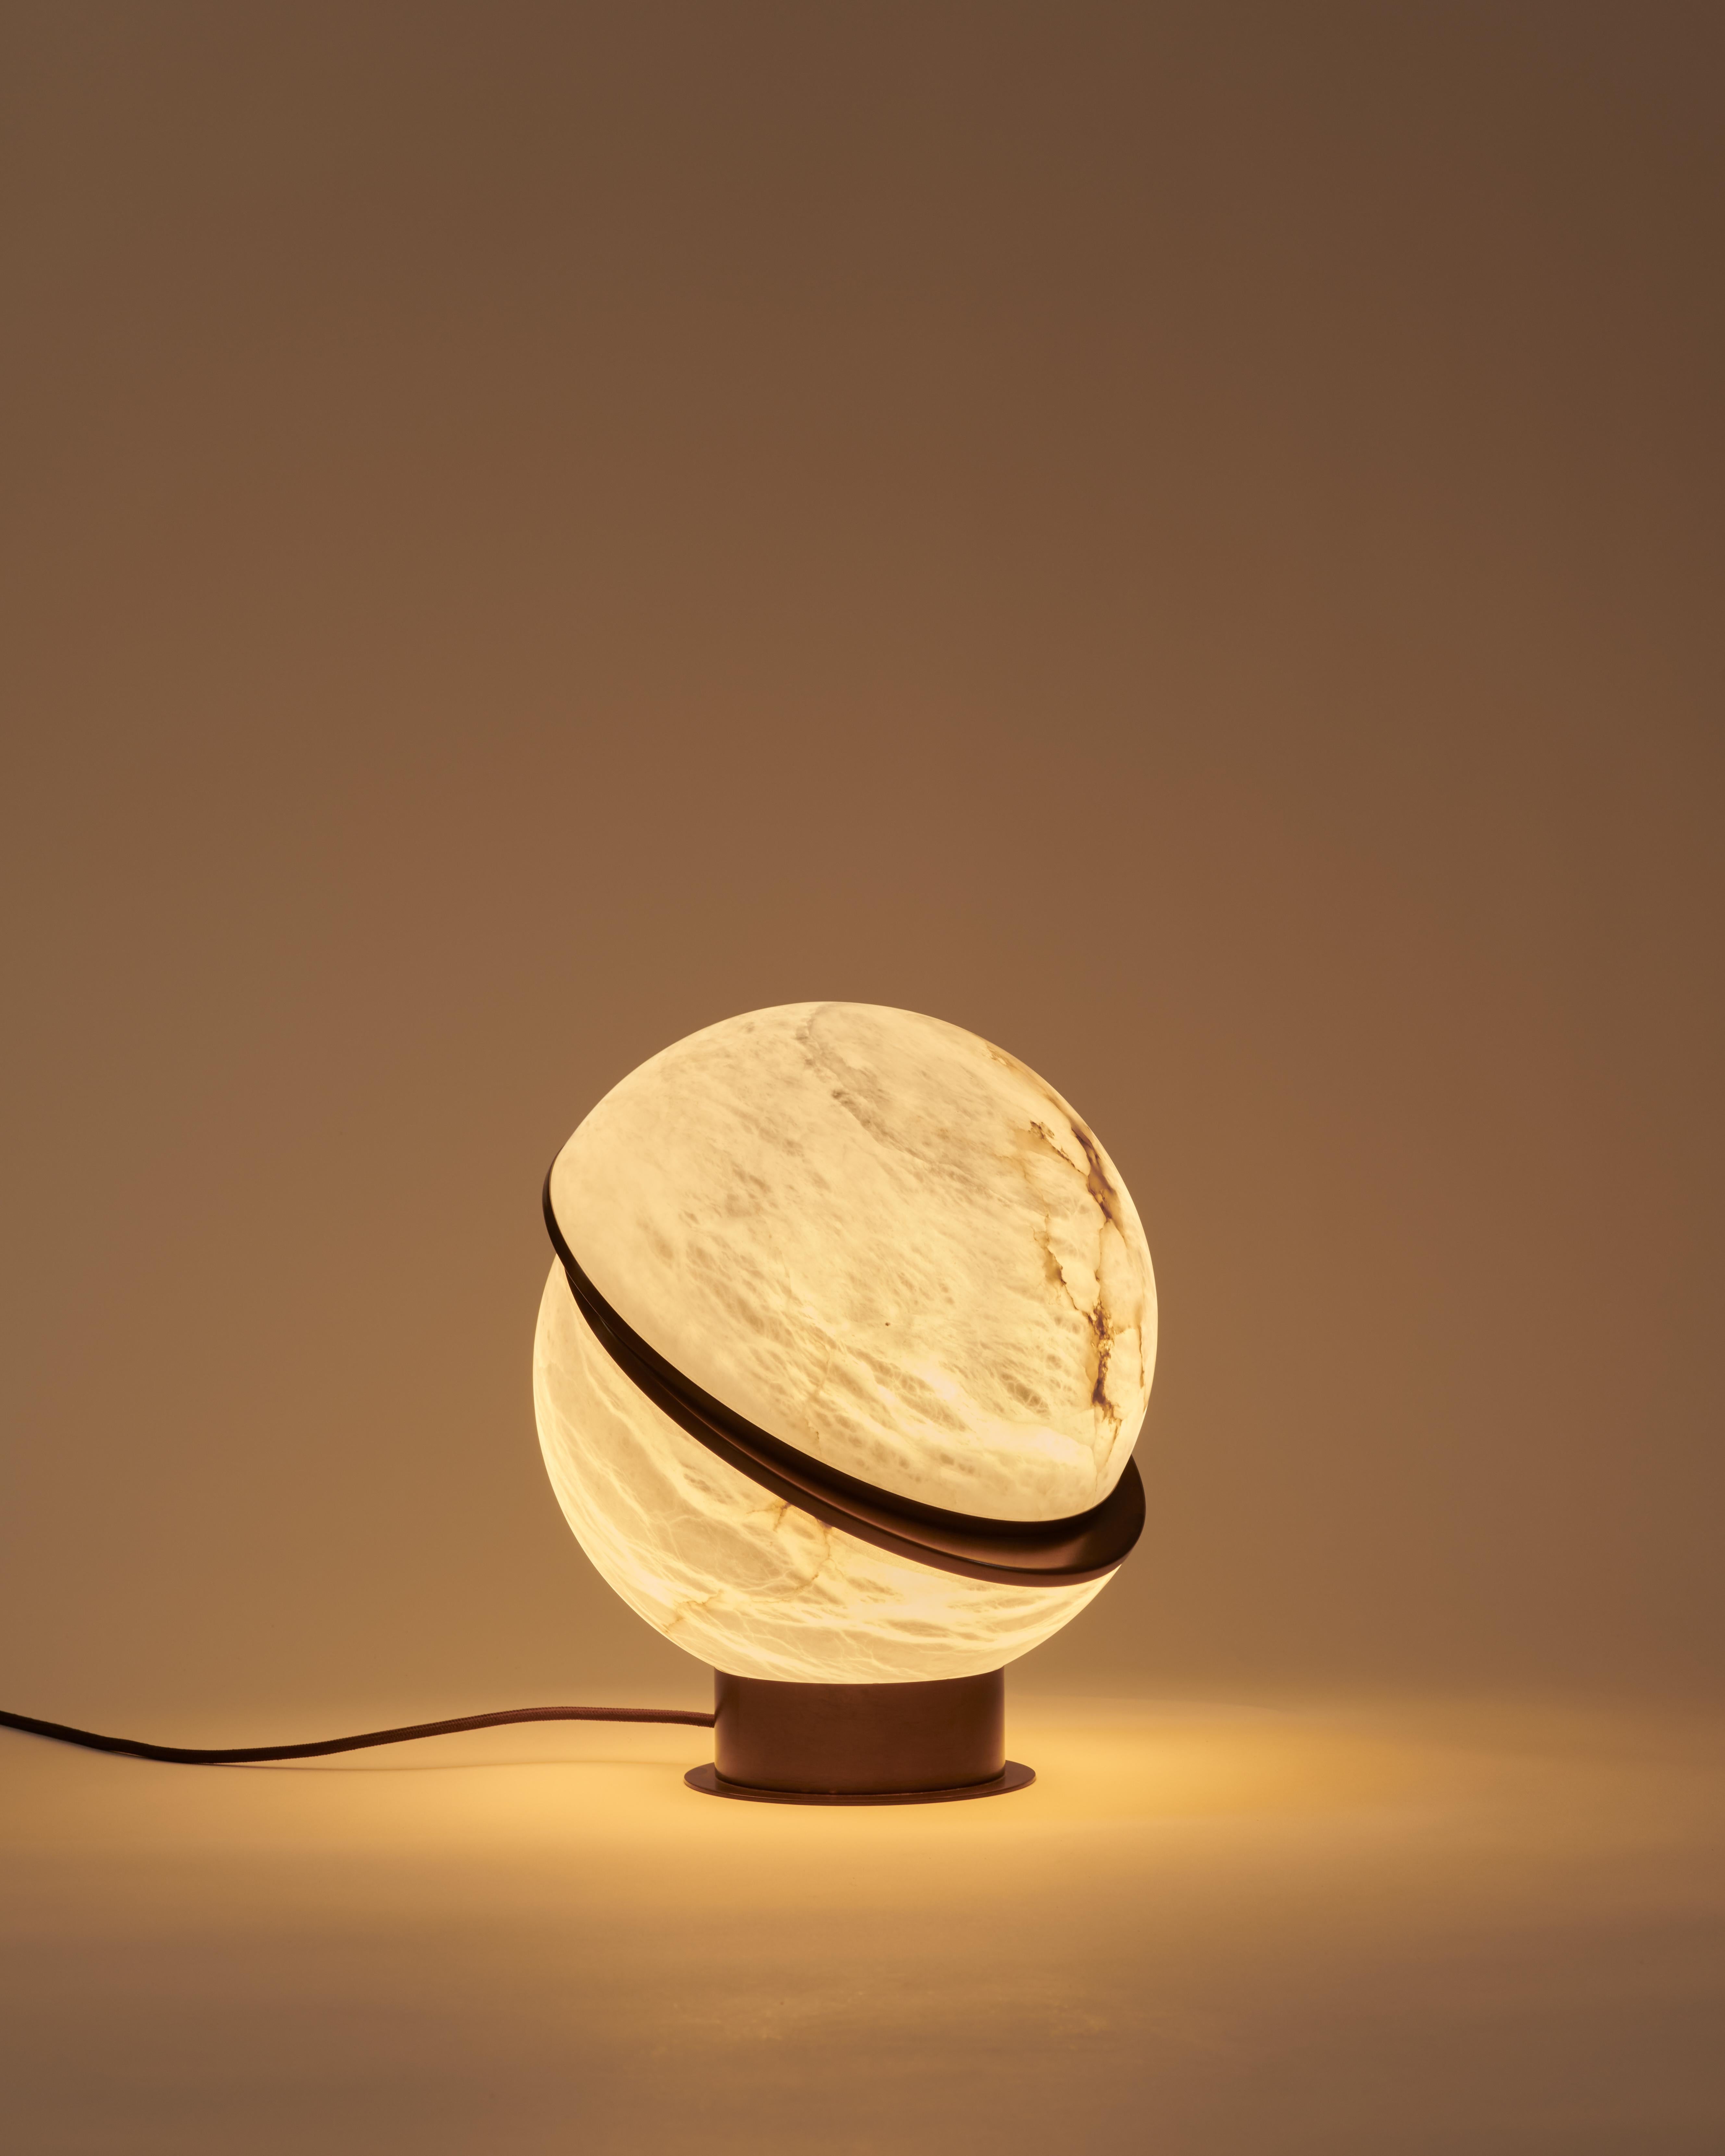 The Alabaster Globe table lamp is a stunning piece that exudes elegance and sophistication. The lamp features two half spheres of backlit alabaster, held together by a thin brass contour. The magic of the alabaster's veins is showcased through the